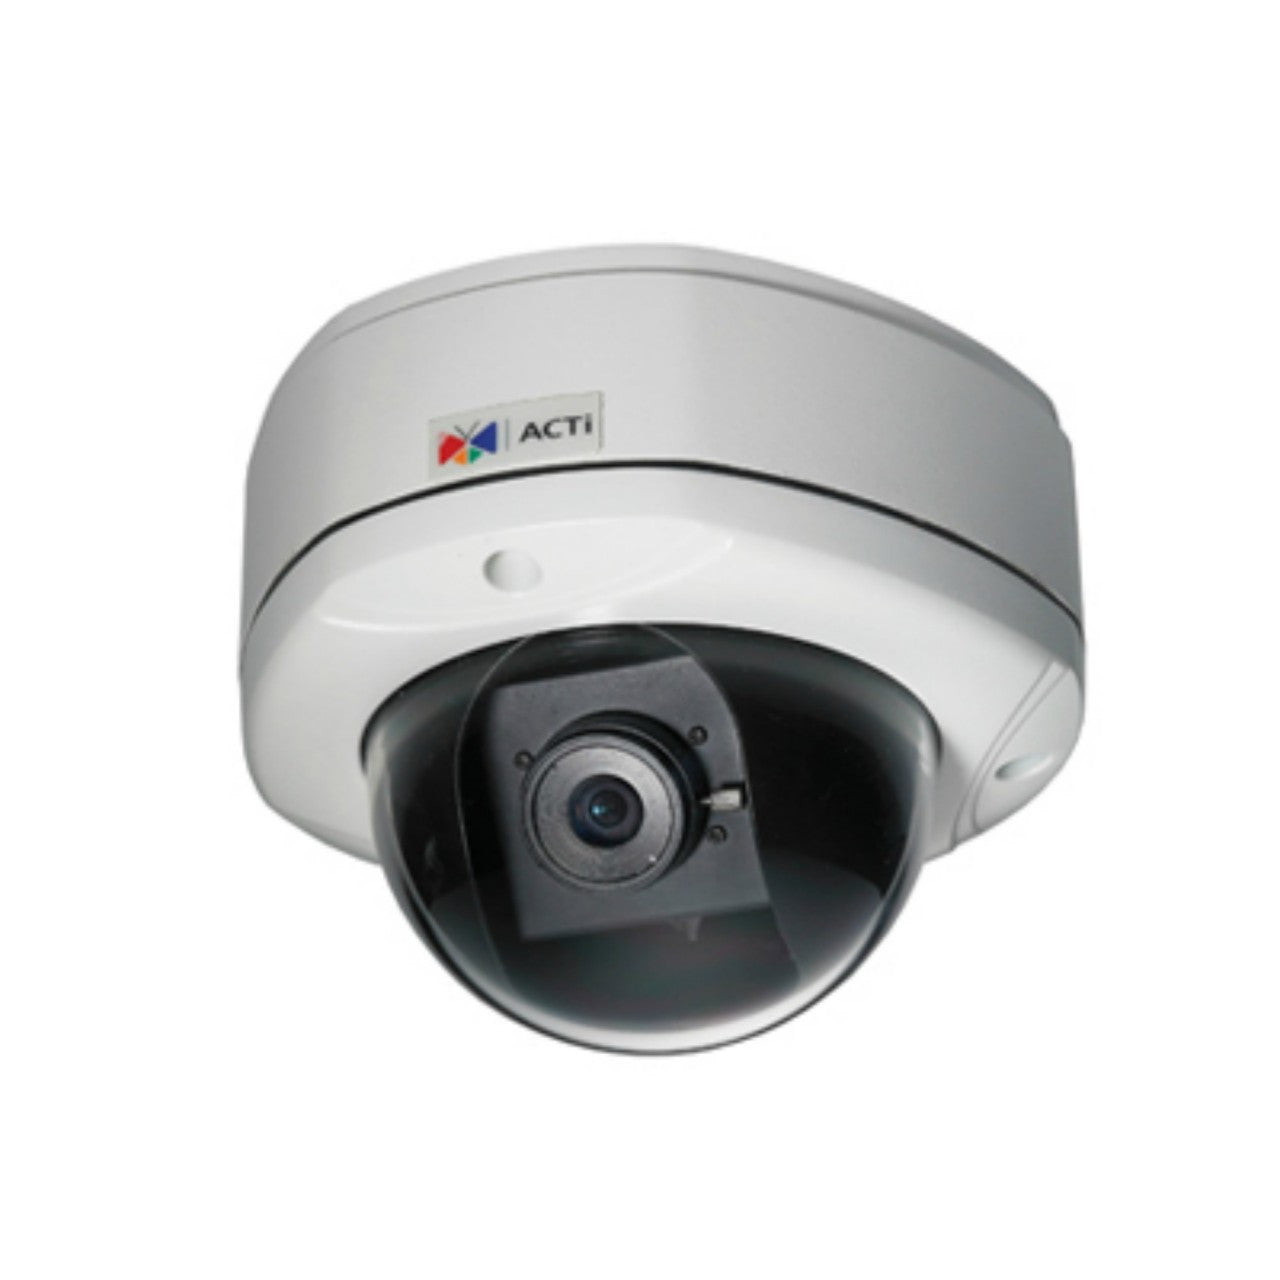 ACTi KCM-7111 4MP Outdoor Dome Network Camera